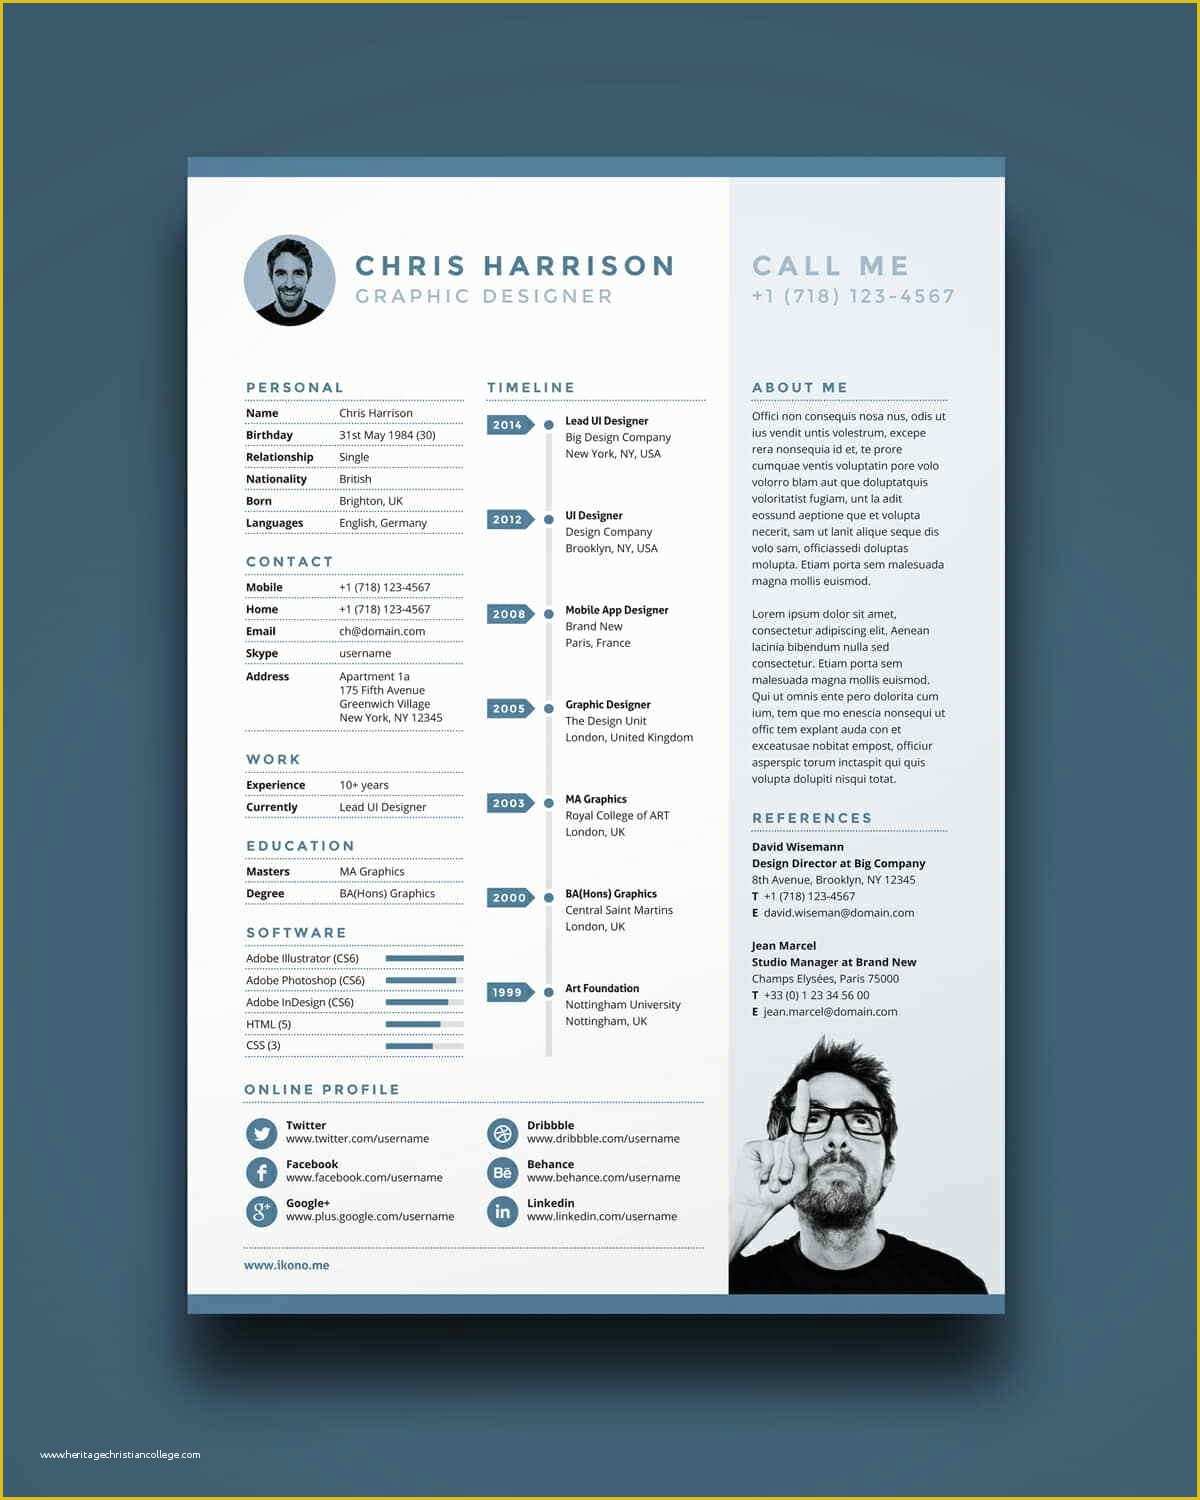 Free Sample Resume Templates Of Free Resume Templates 17 Free Cv Templates to Download & Use